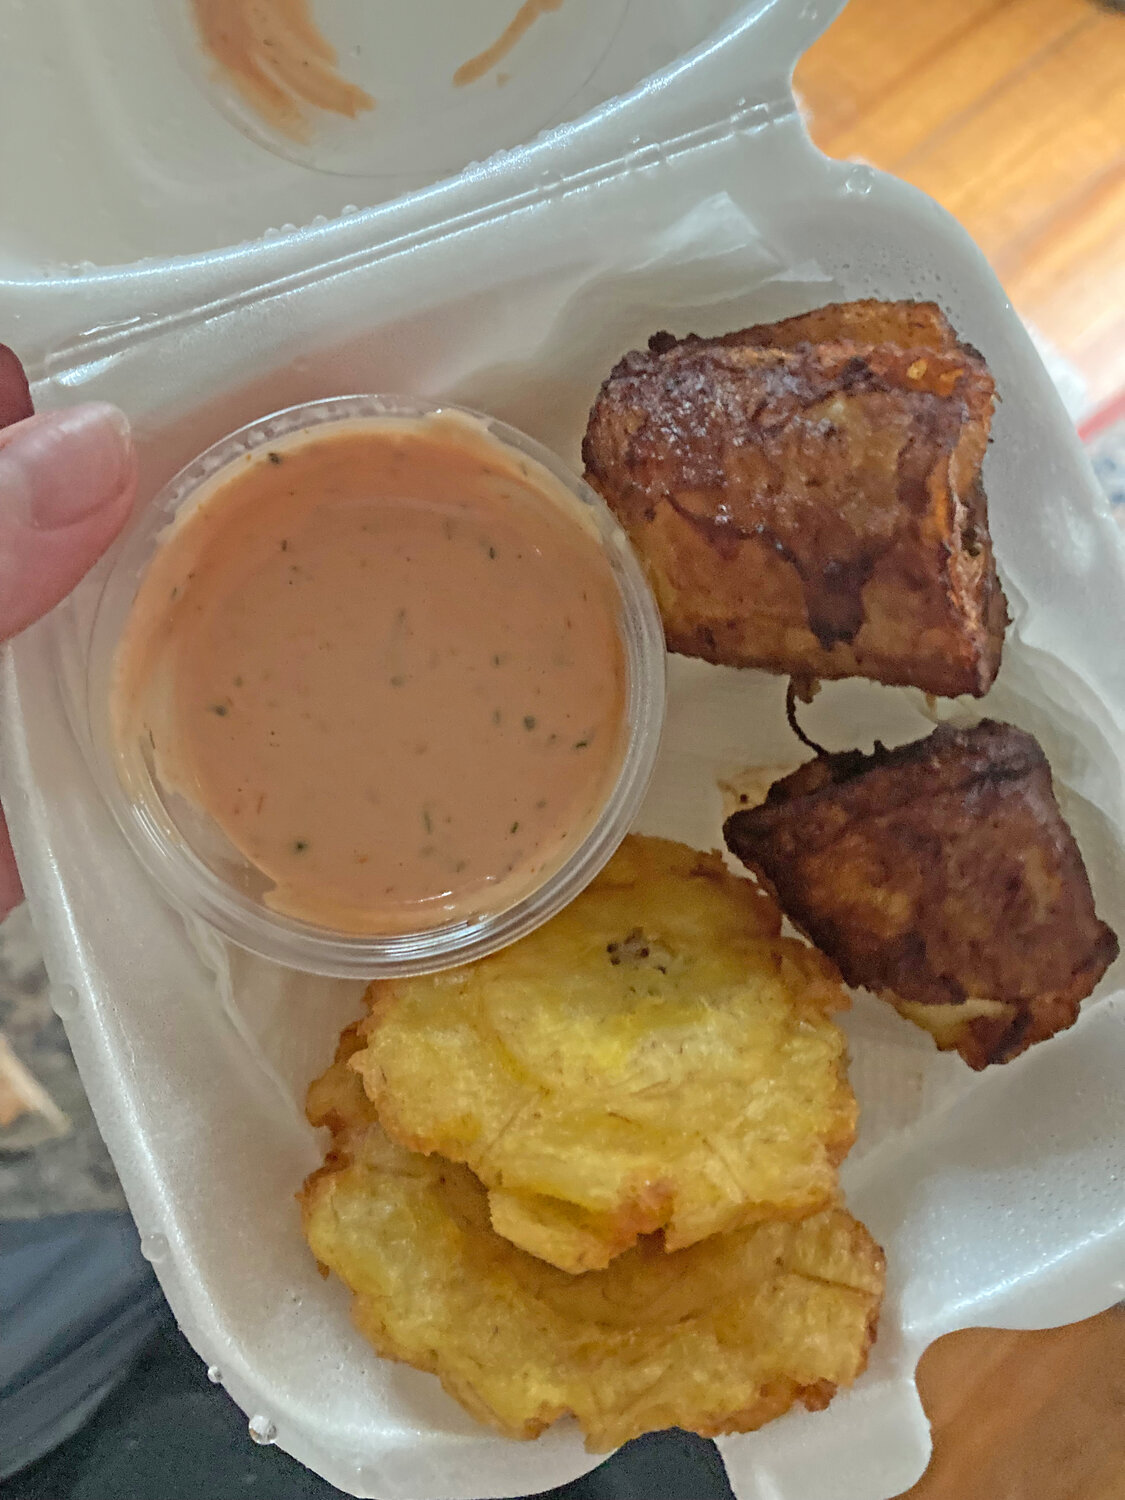 Tostones (fried plantains) from Buon Provenchal.